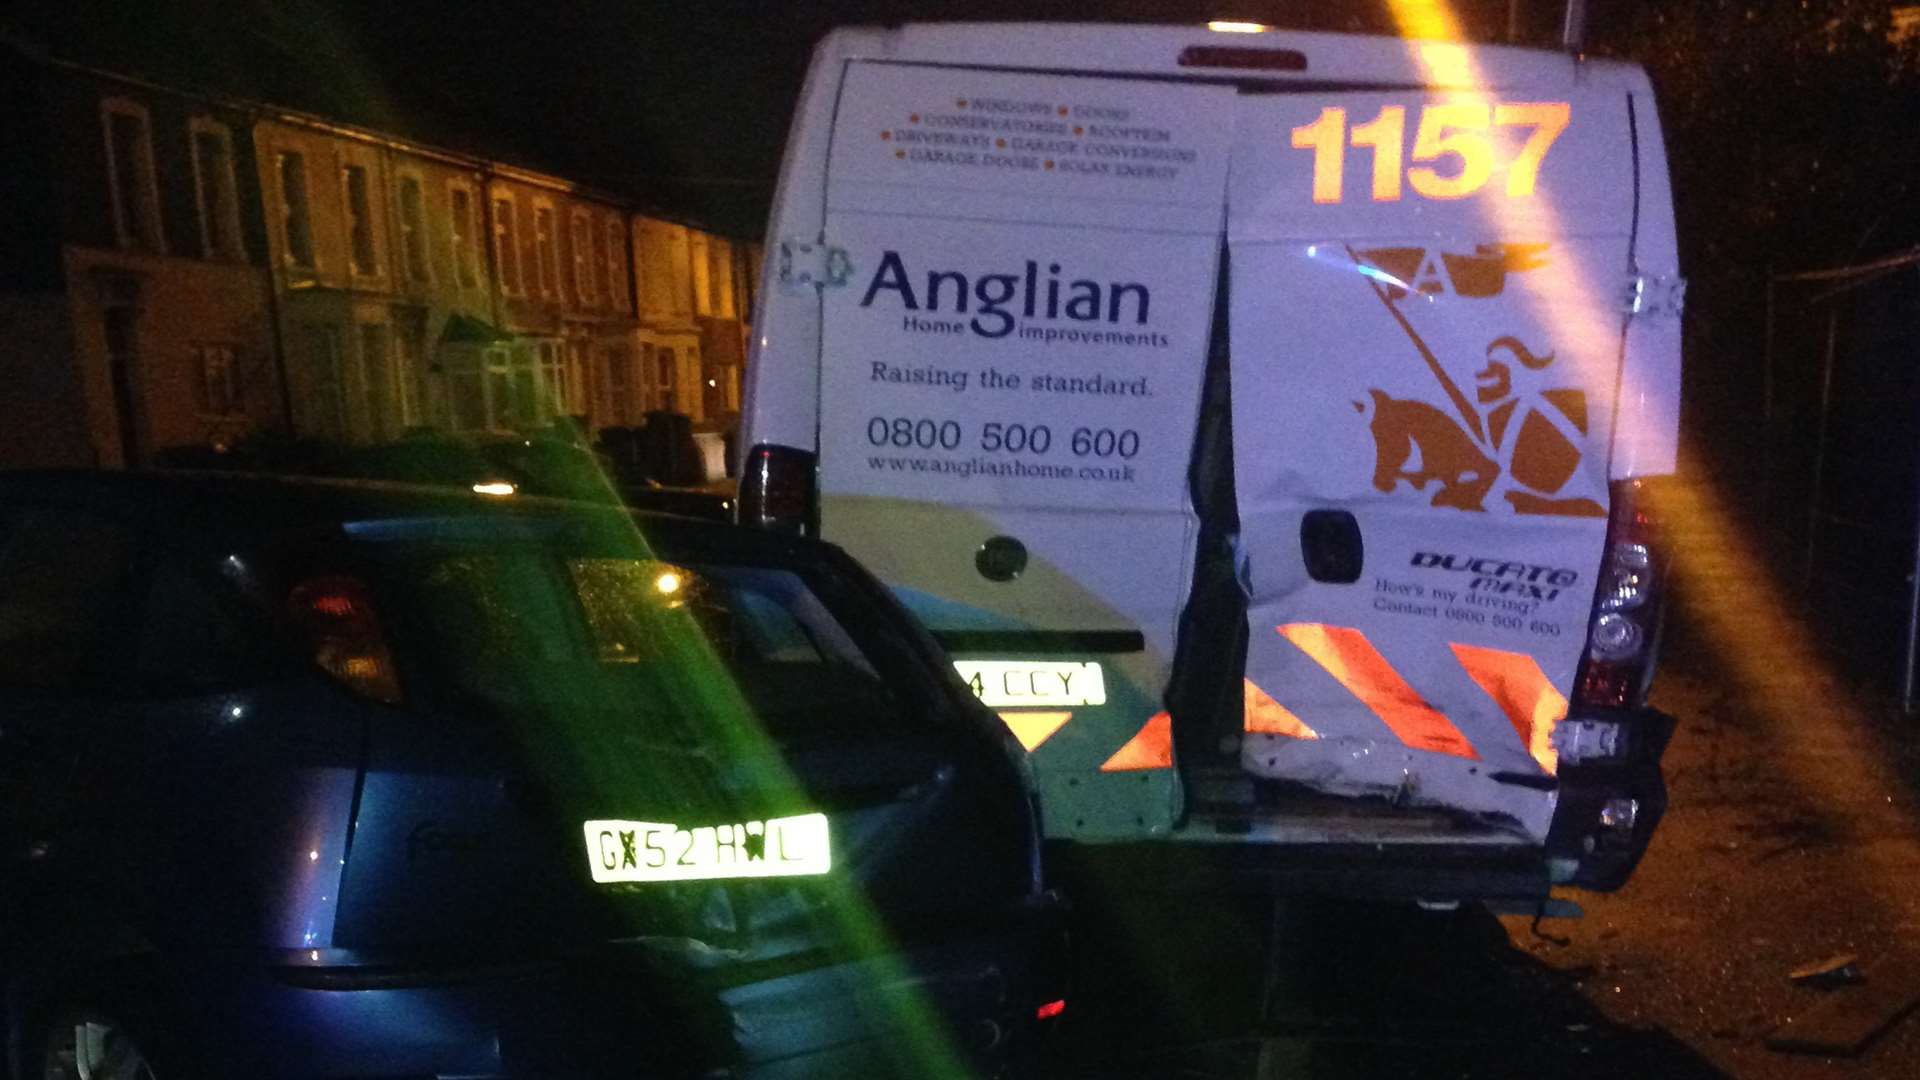 The damaged black Ford Fiesta and Anglian van belonging to Adrienne and Brett Adams of Sheerness High Street.